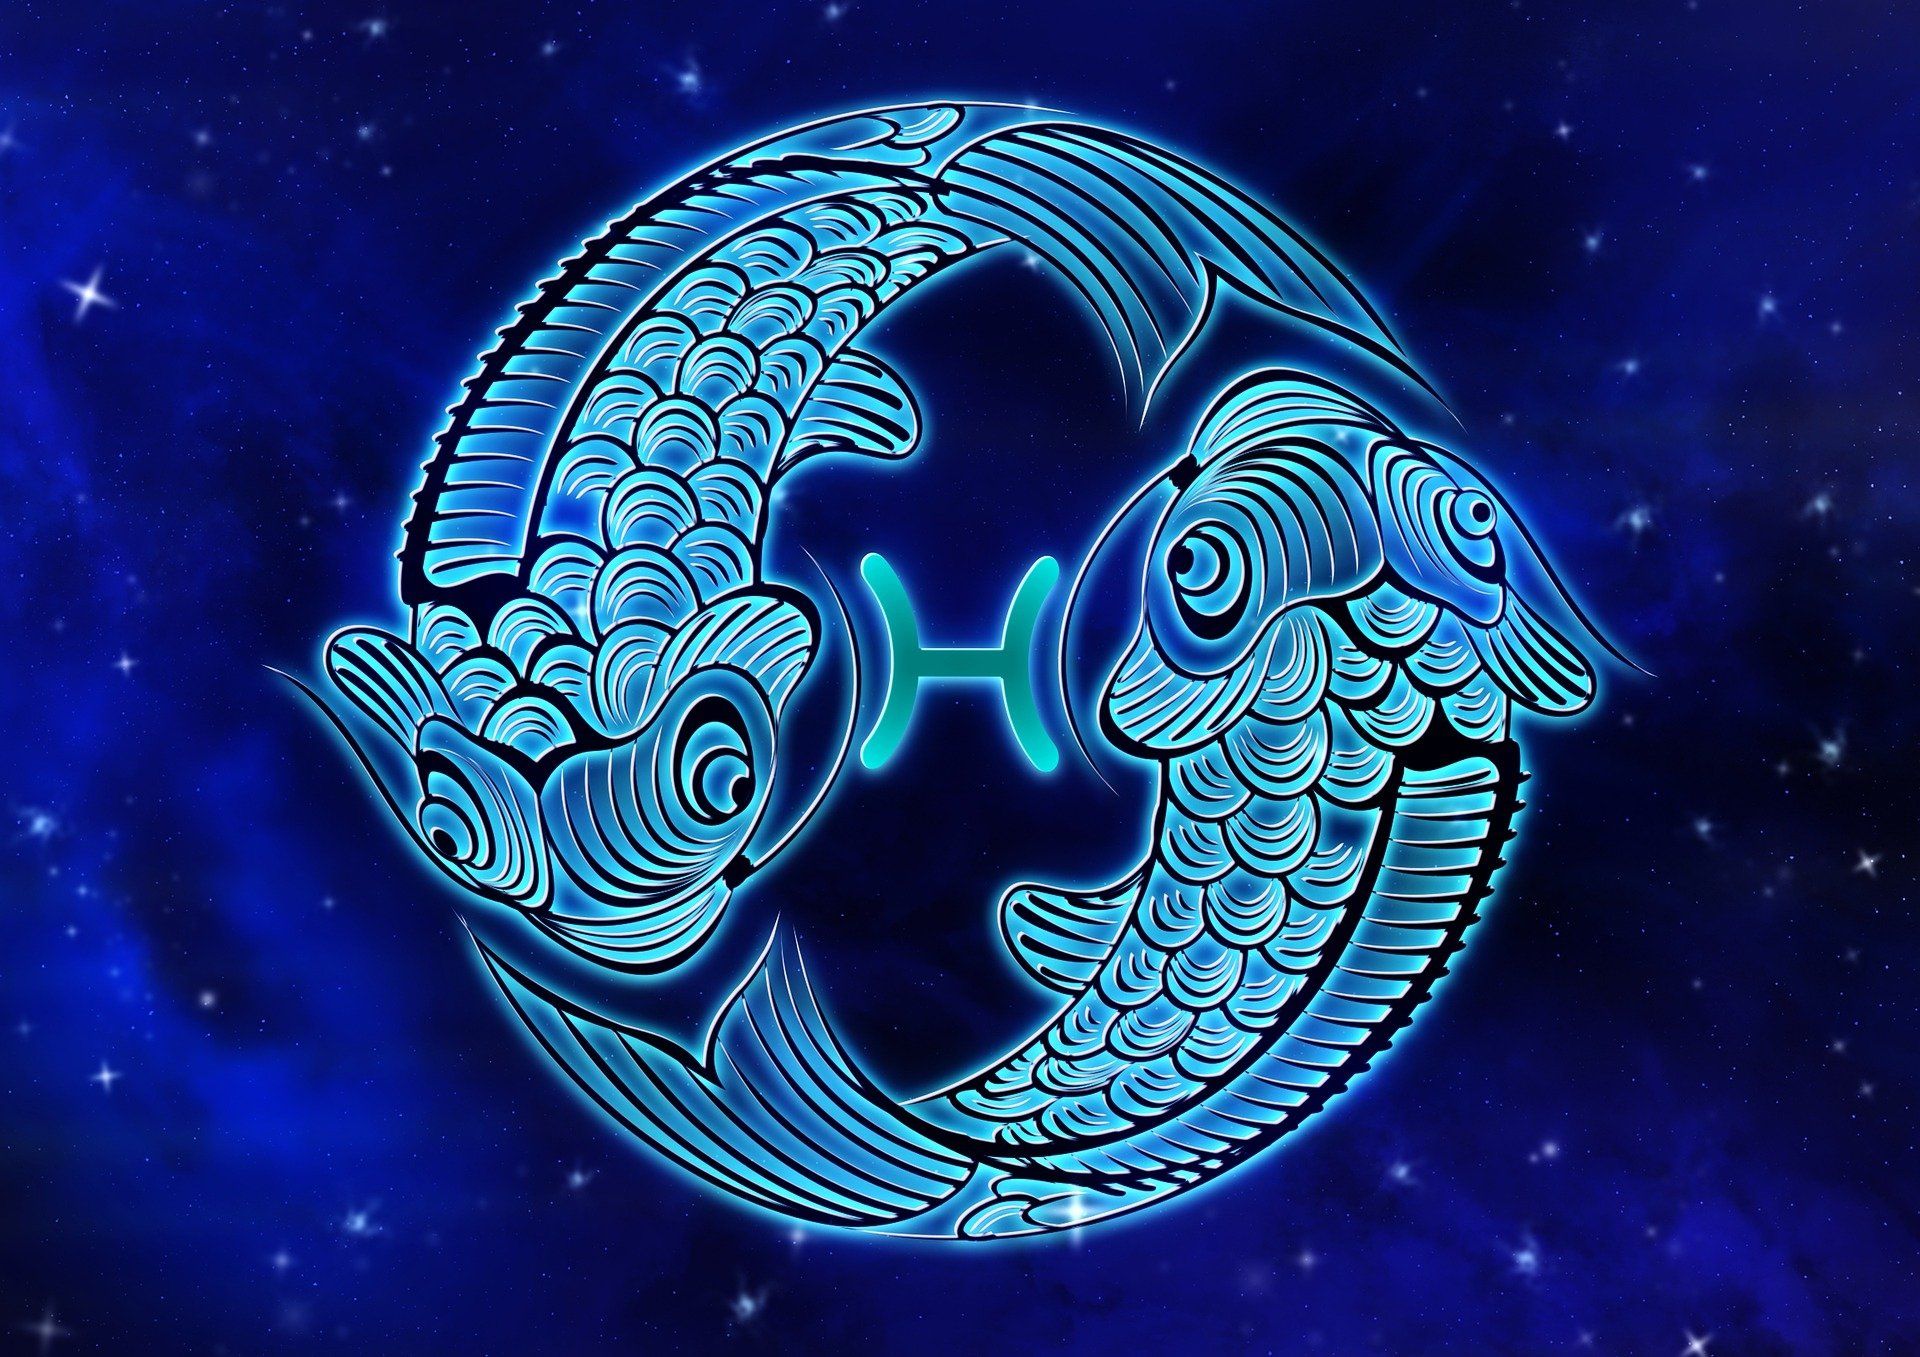 The zodiac sign for pisces is a blue fish - Pisces